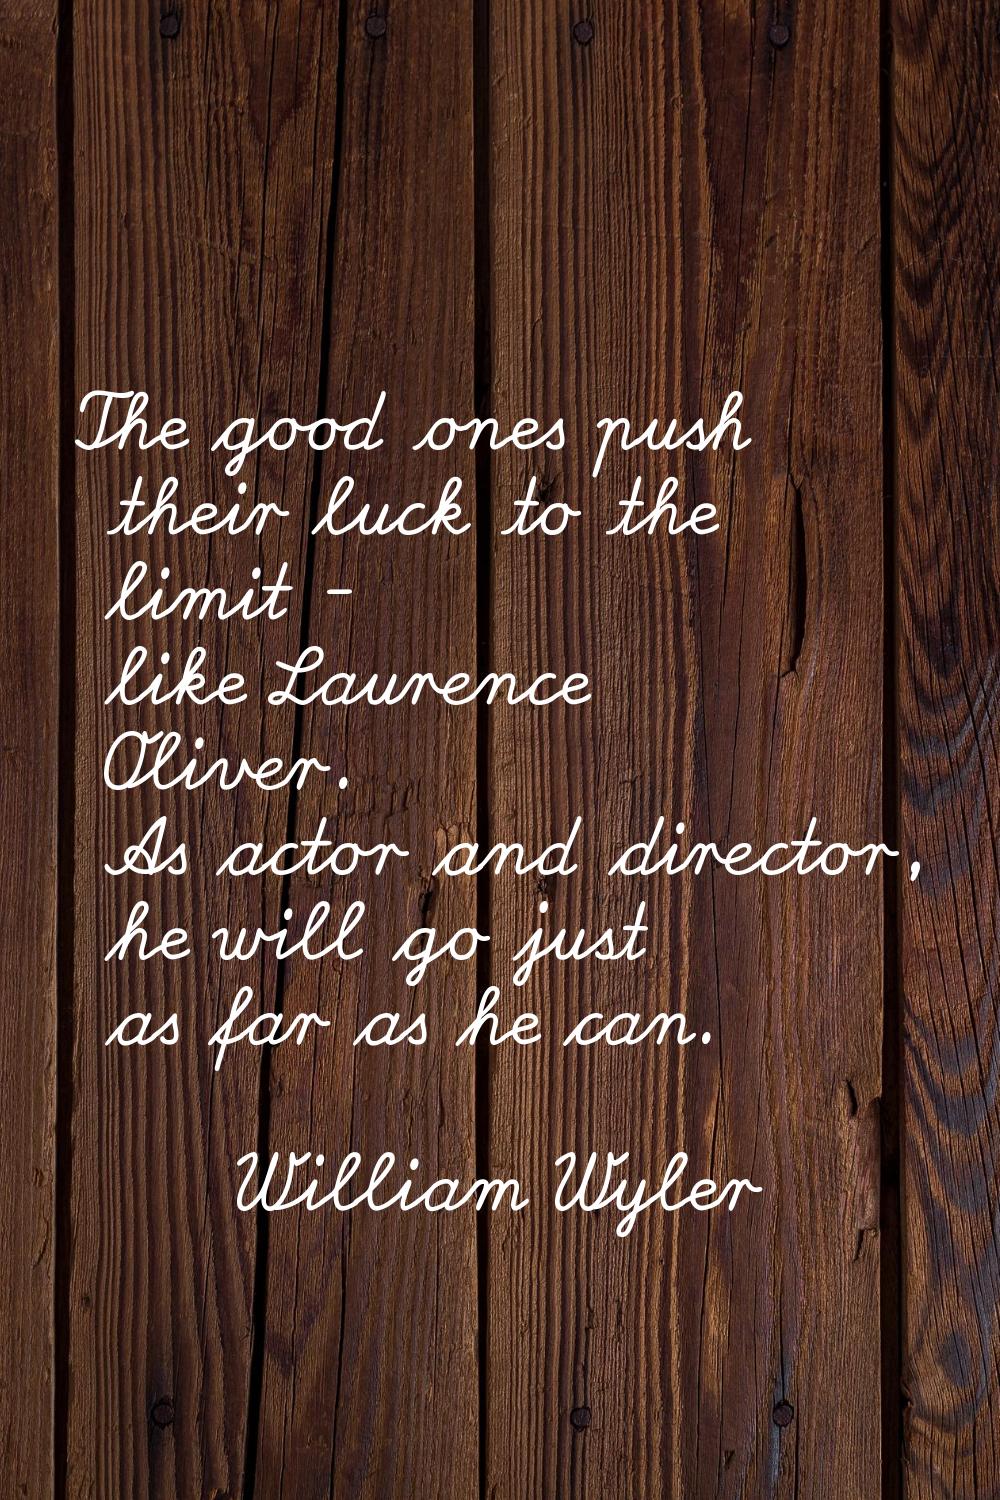 The good ones push their luck to the limit - like Laurence Oliver. As actor and director, he will g